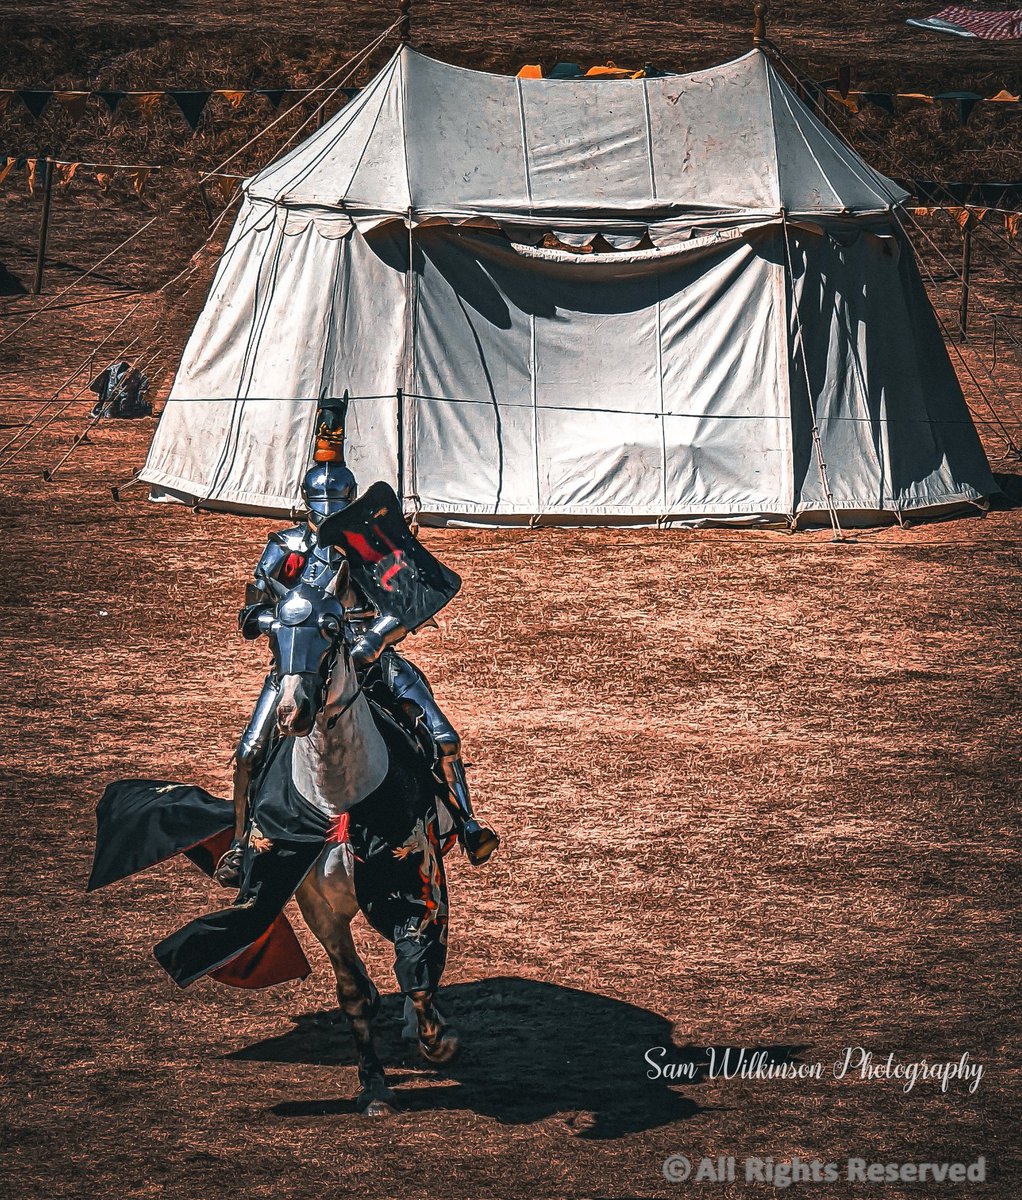 Jousting at Carisbrooke Castle!

#englishheritage #jousting #joustingtournament #englishhistory #medievalengland #actionphotography #actionphoto #photography #photo #photographer #photograph #horse #horsephoto #drygrass #medieval #knight #joust #rider